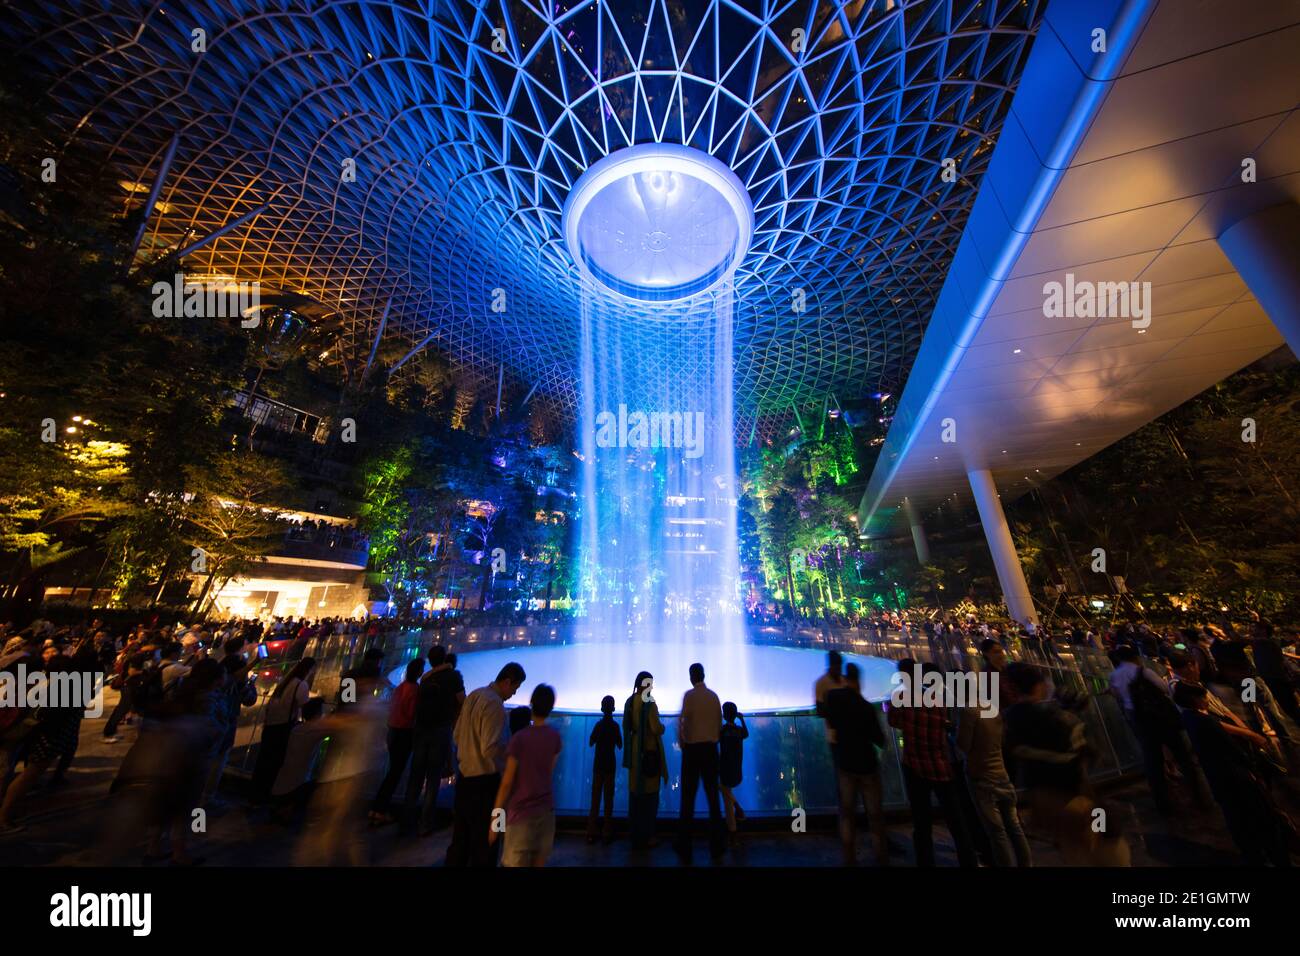 The Jewel Changi Airport in Singapore at night. A mixed use development complex featuring a rain vortex, the largest indoor waterfall in the world. Stock Photo